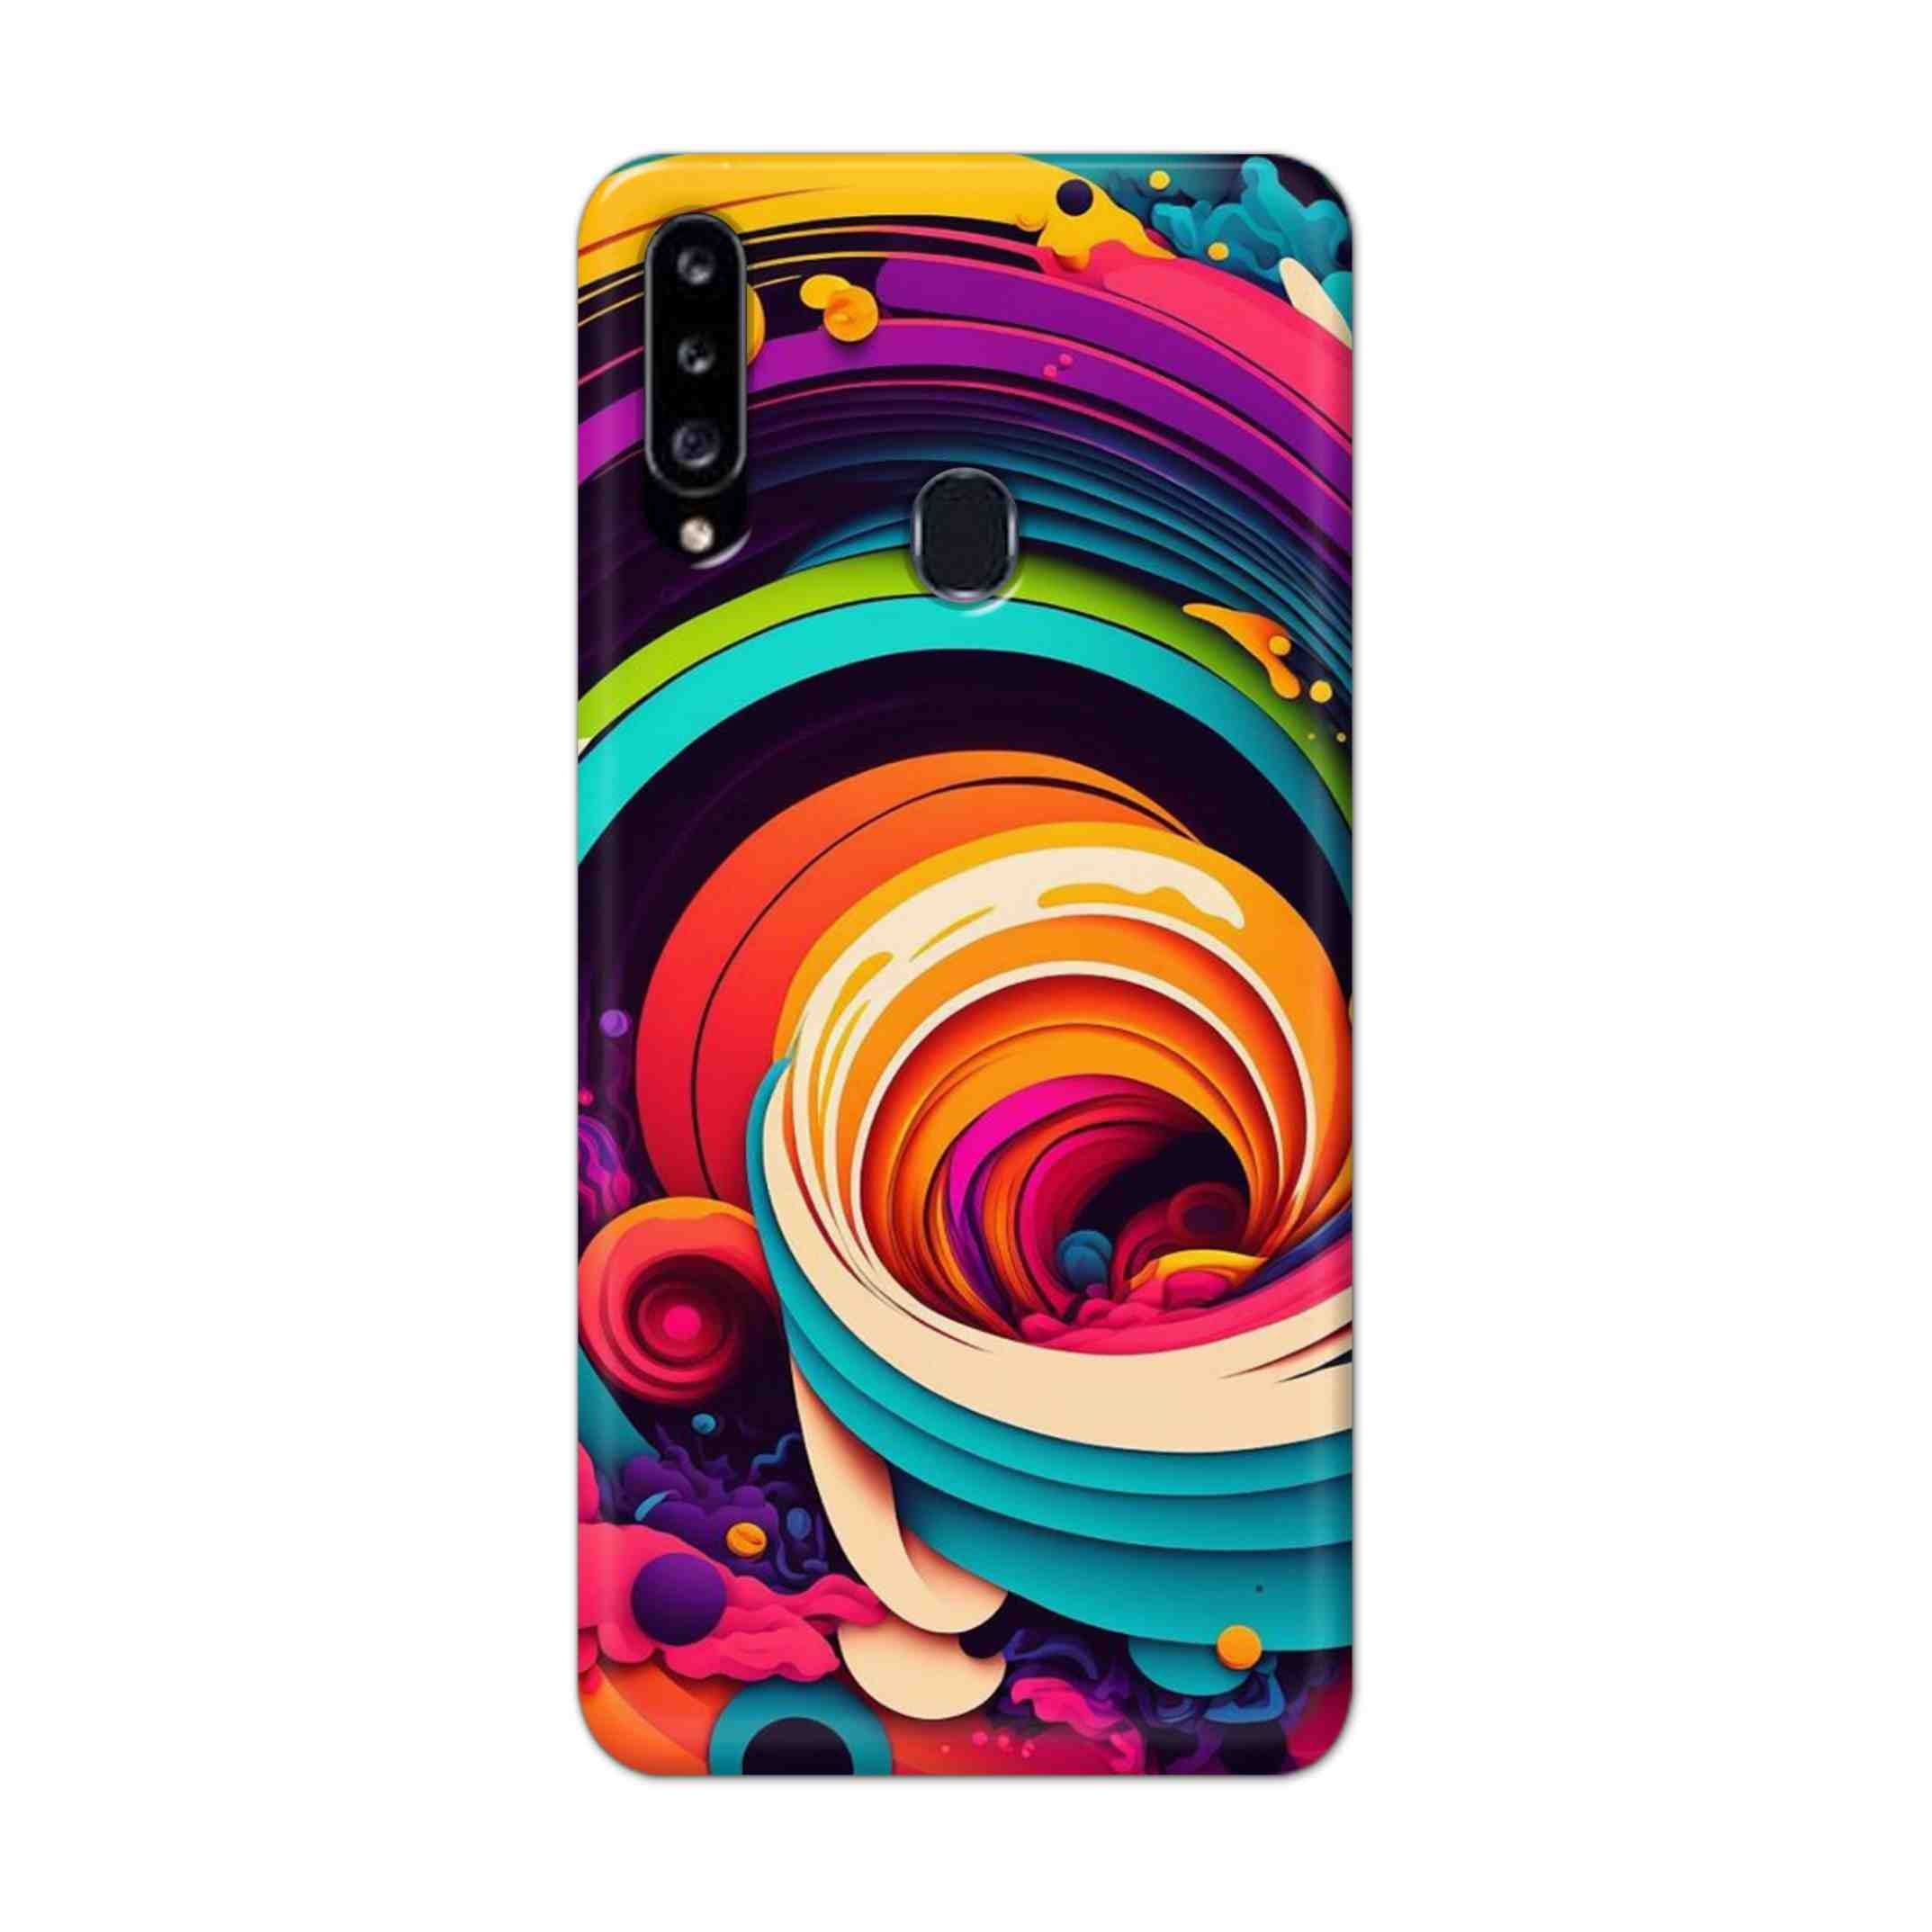 Buy Colour Circle Hard Back Mobile Phone Case Cover For Samsung Galaxy A21 Online